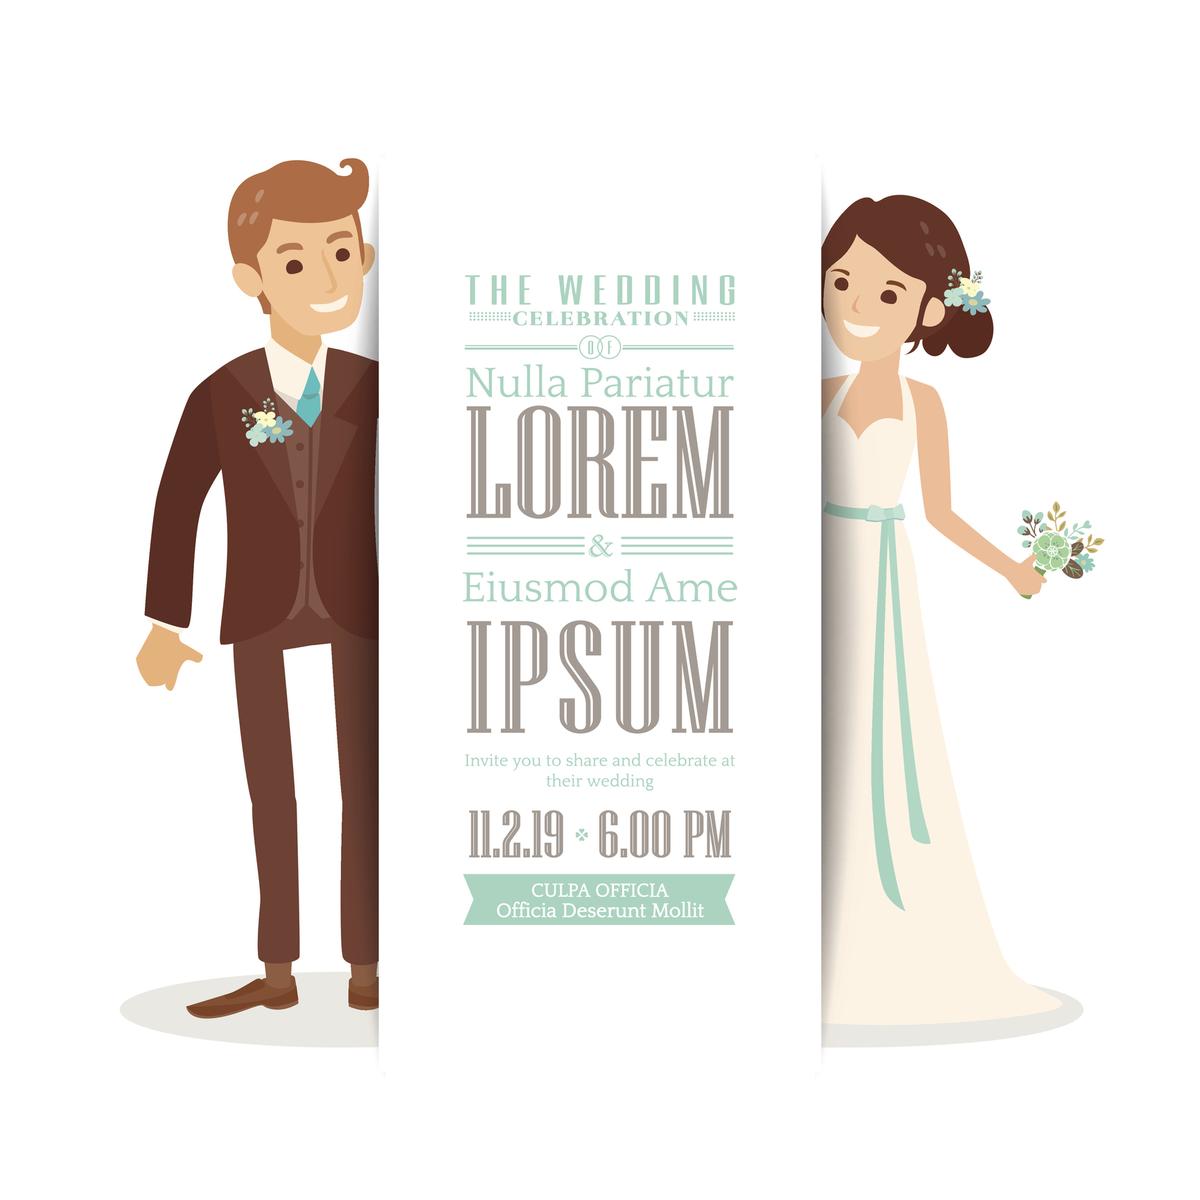 Funny Wedding Invitations That'll Have Your Guests Chuckling - Wedessence